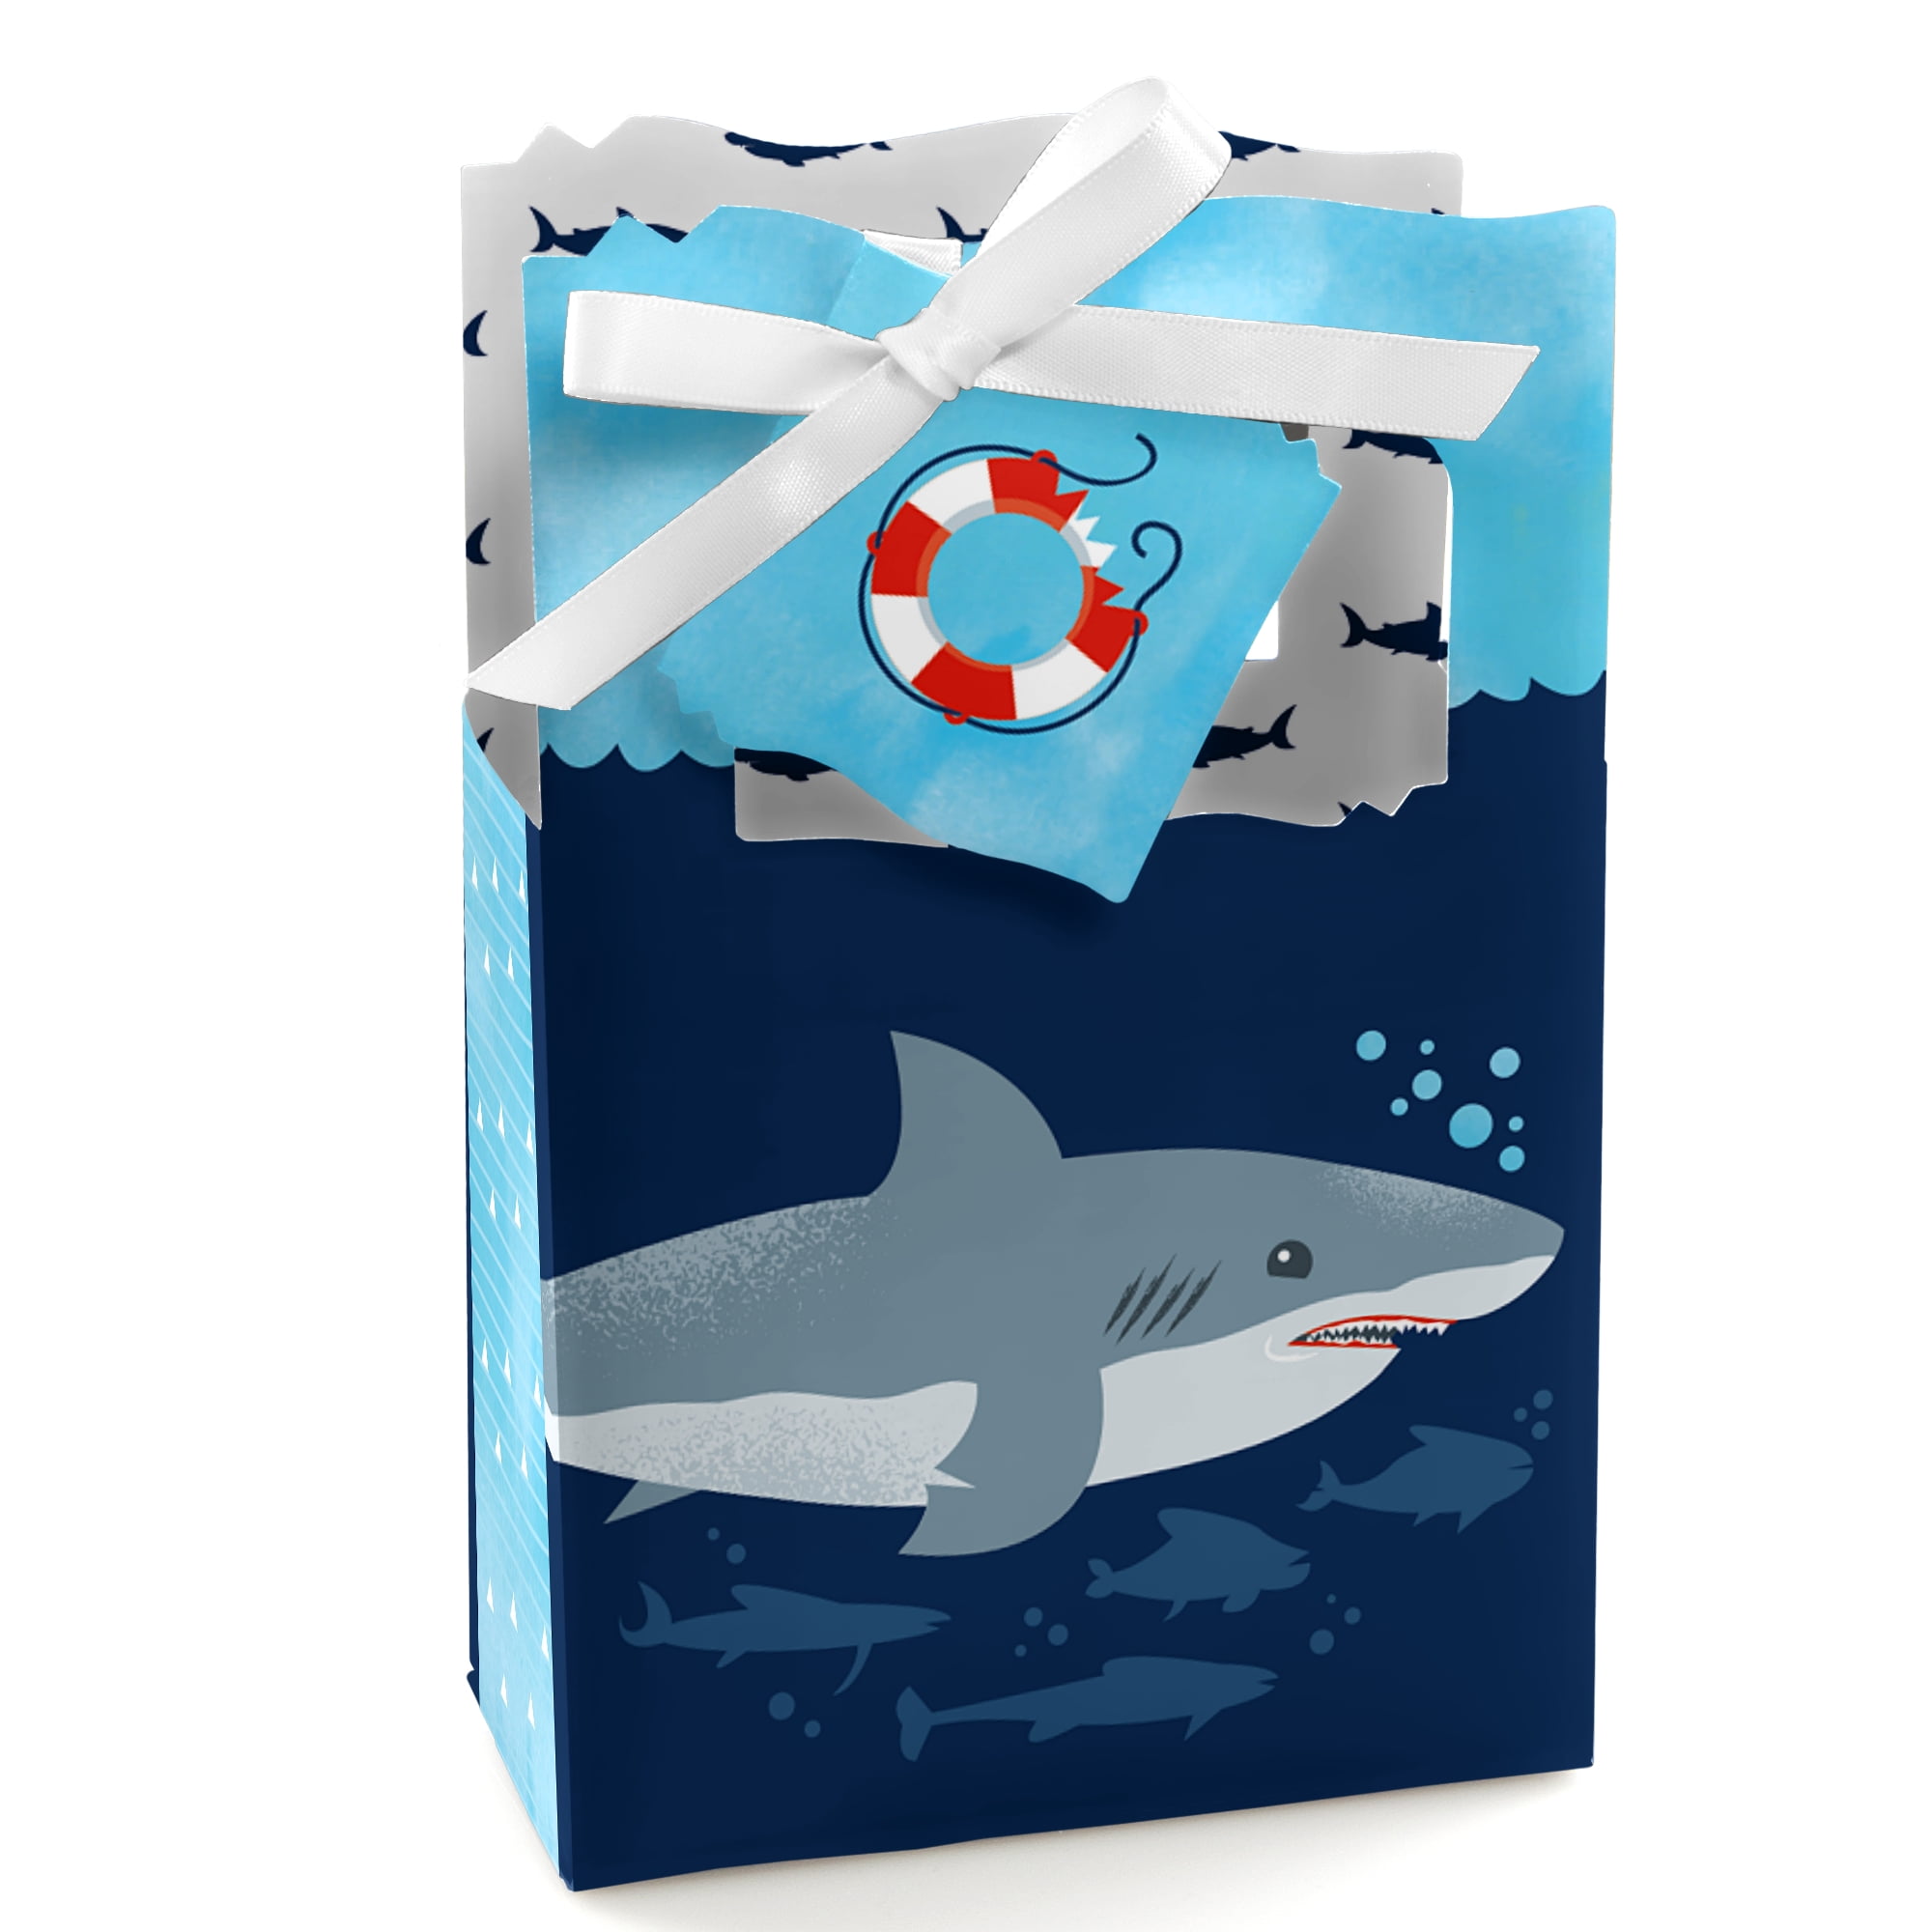 Let Your Kids Get Creative /& Design Their Favorite Shark Stickers 24 Make A Shark Pup Stickers for Kids Decorations Great for Birthday Party Favors Prizes Fun Kids Craft Activity